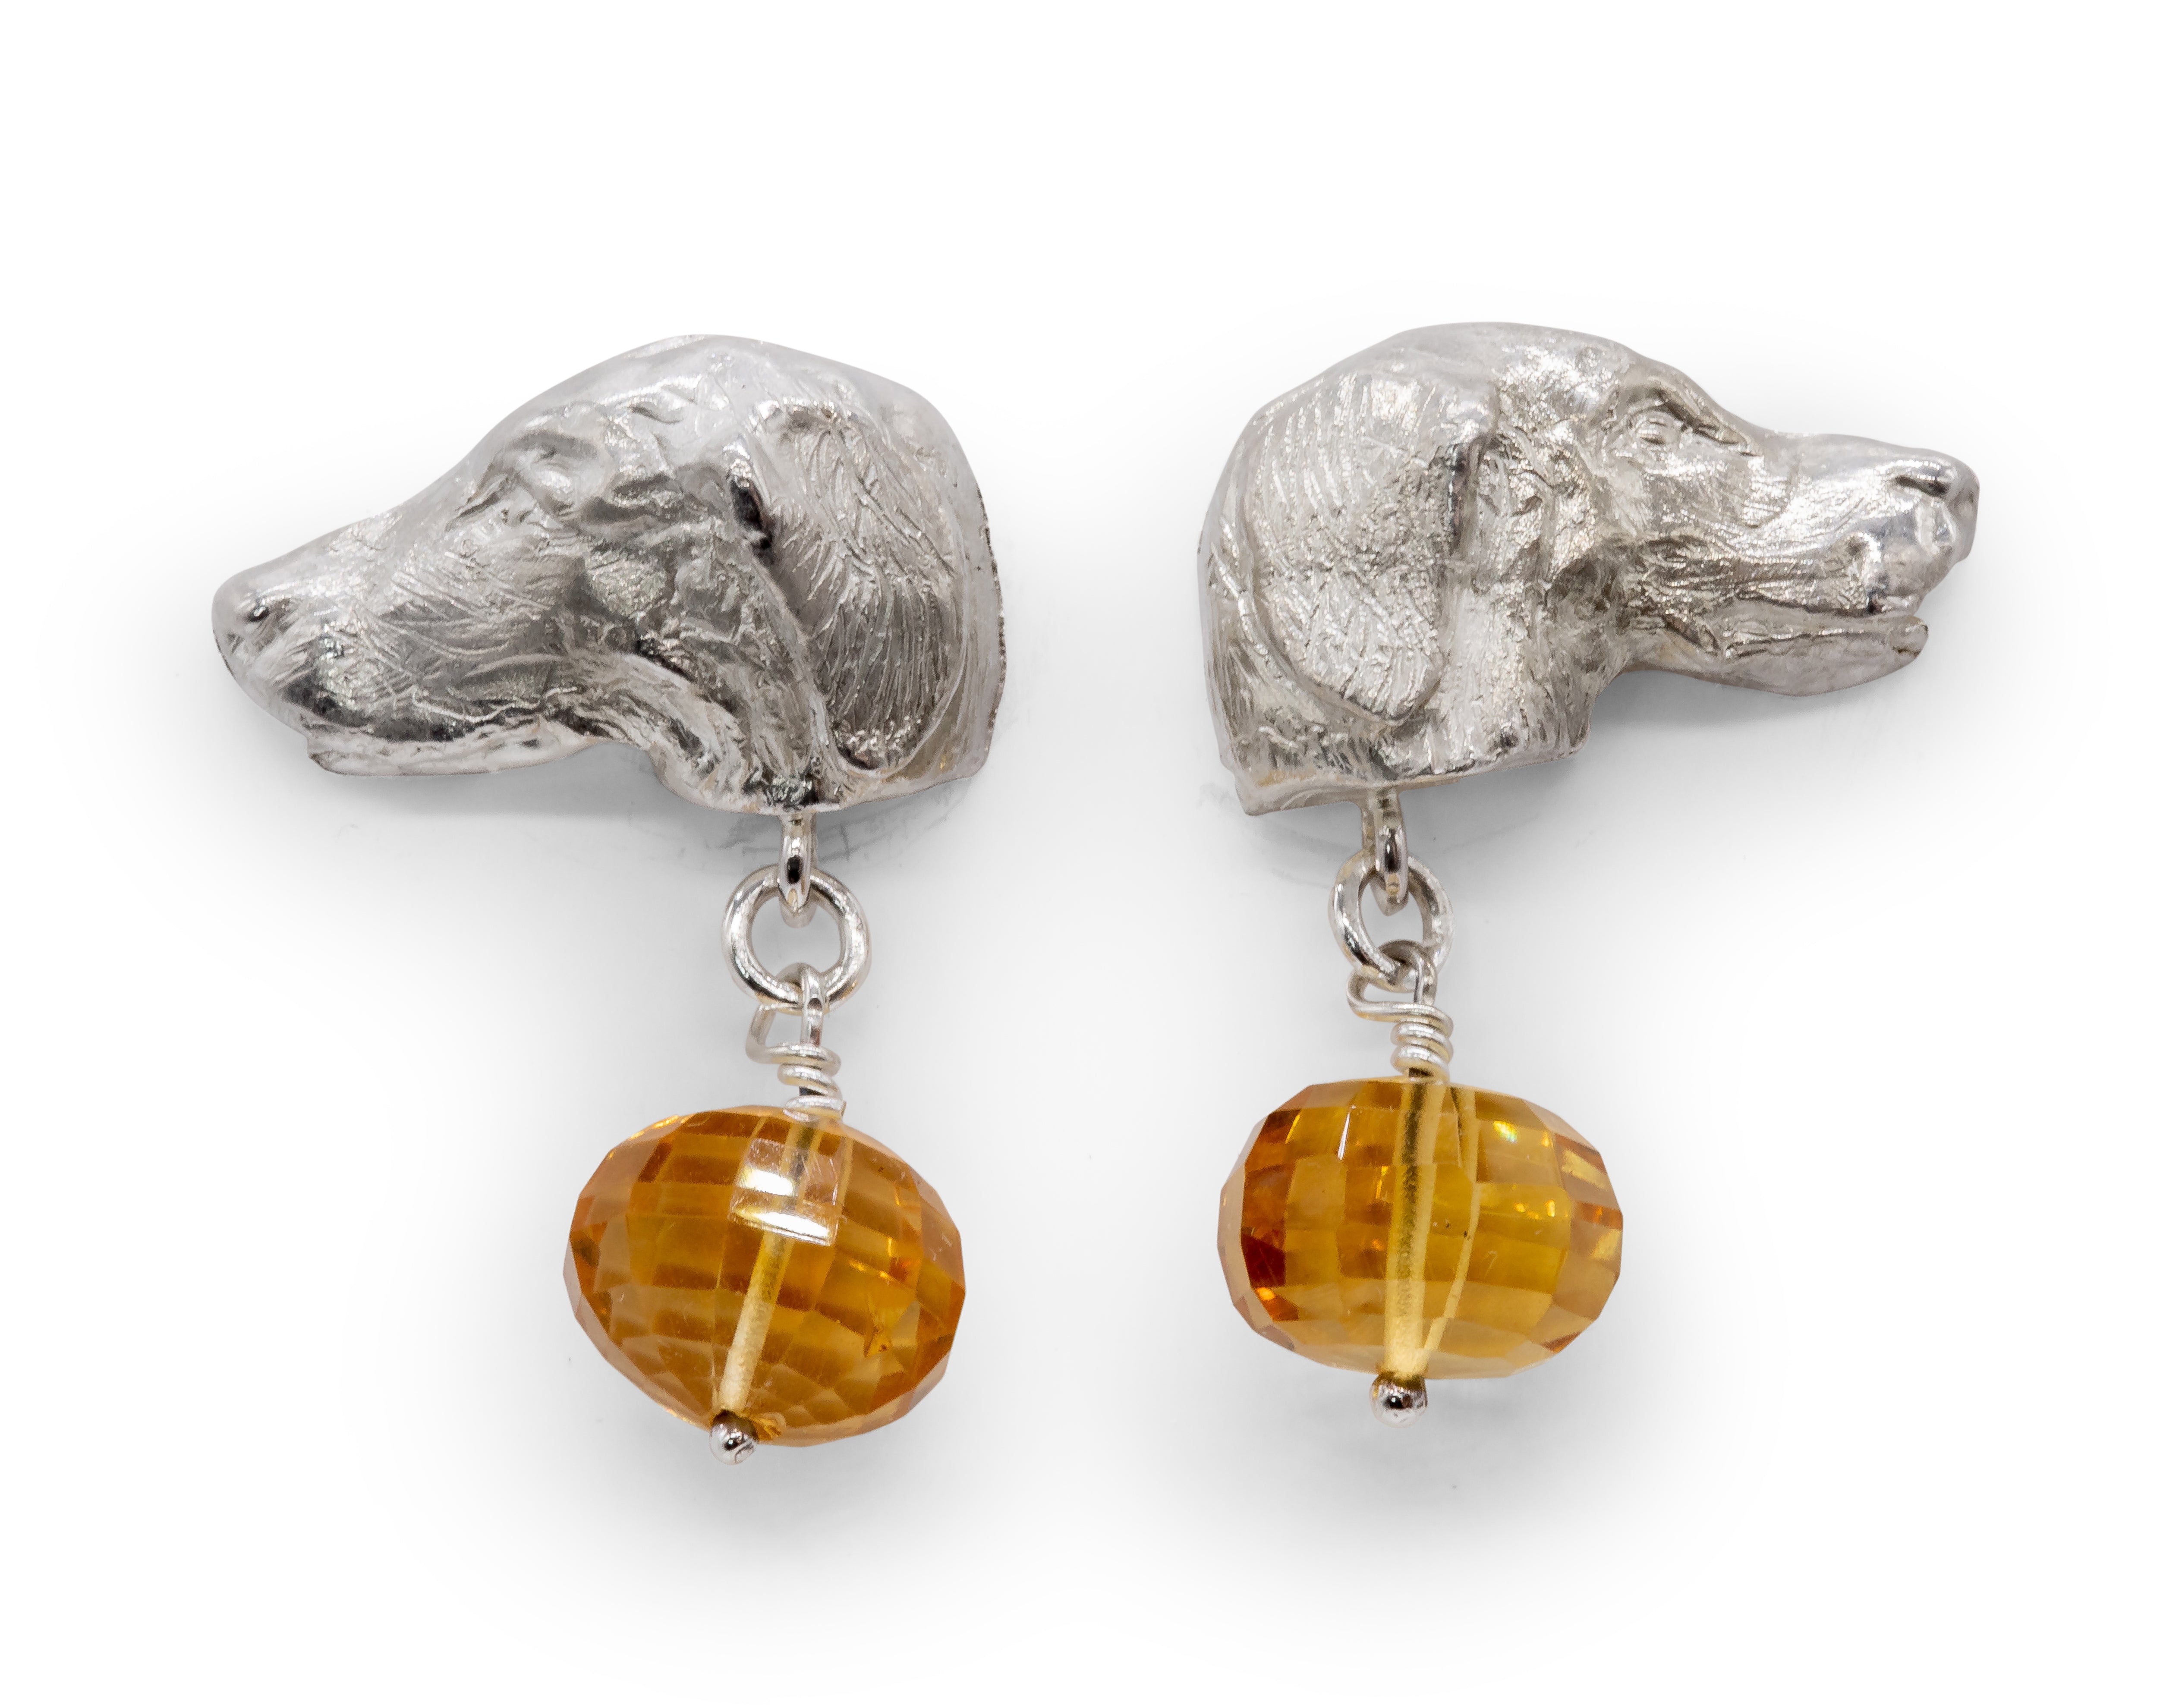 Retriever Sterling Silver Stud Earrings with Citrine Drops